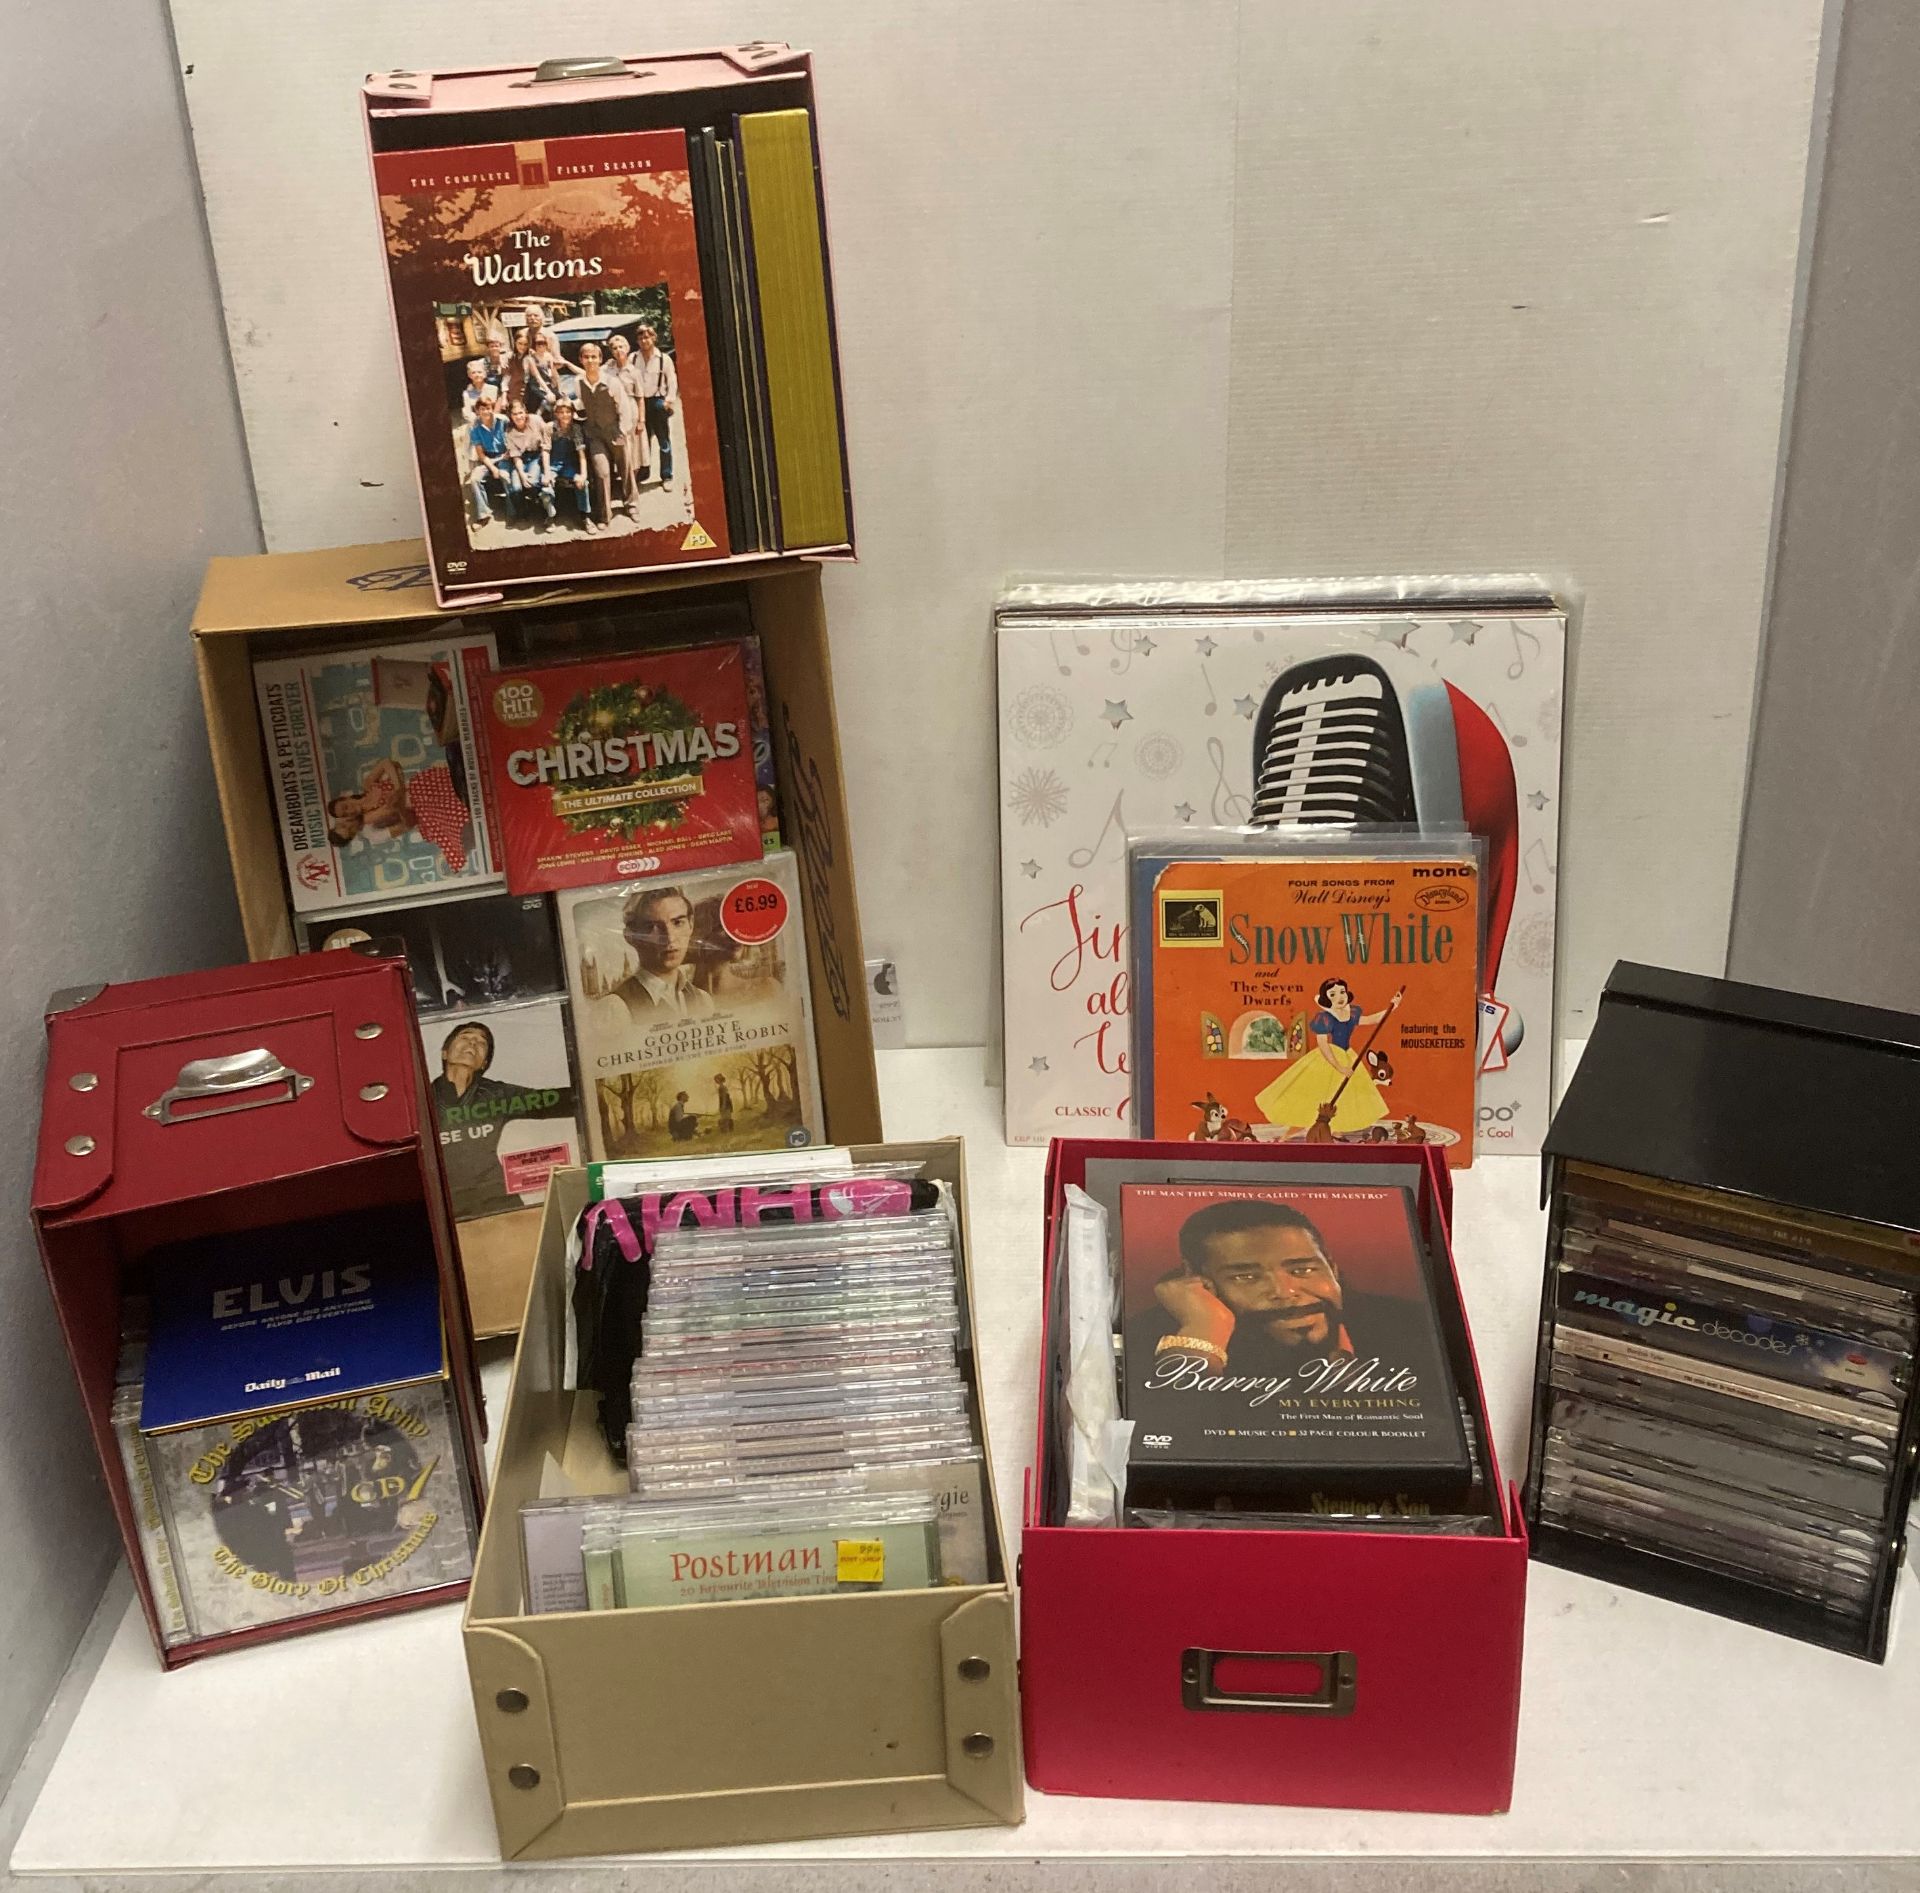 A quantity of LP's, DVD's and CD's including The Waltons, Cliff Richard, Elvis,